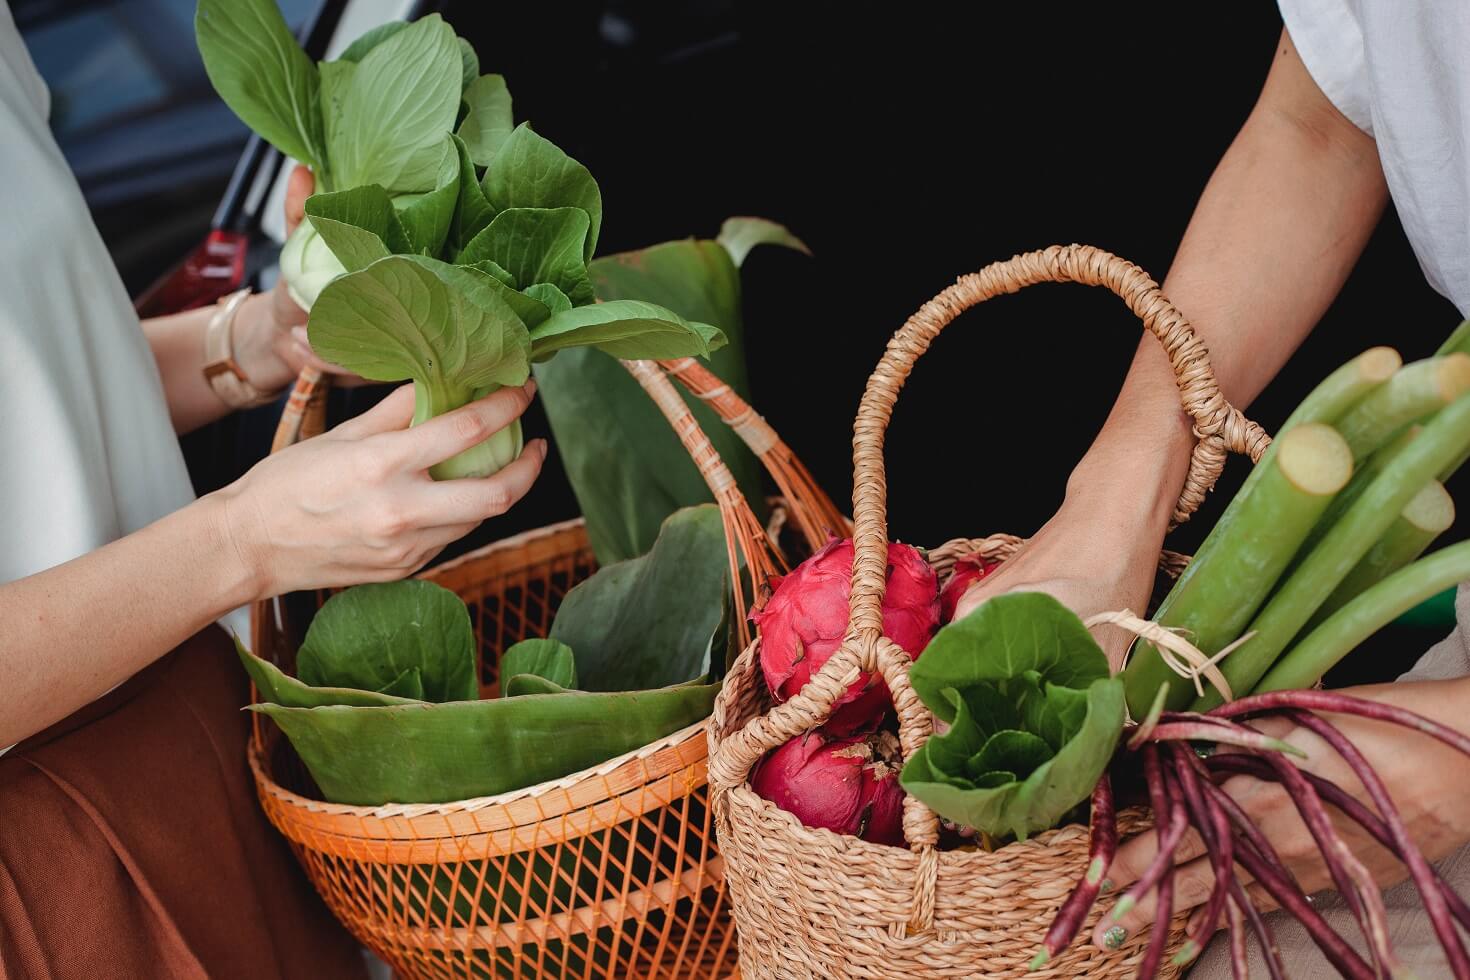 Two people holding bags of heart-healthy produce including celery, bok choy, and radishes